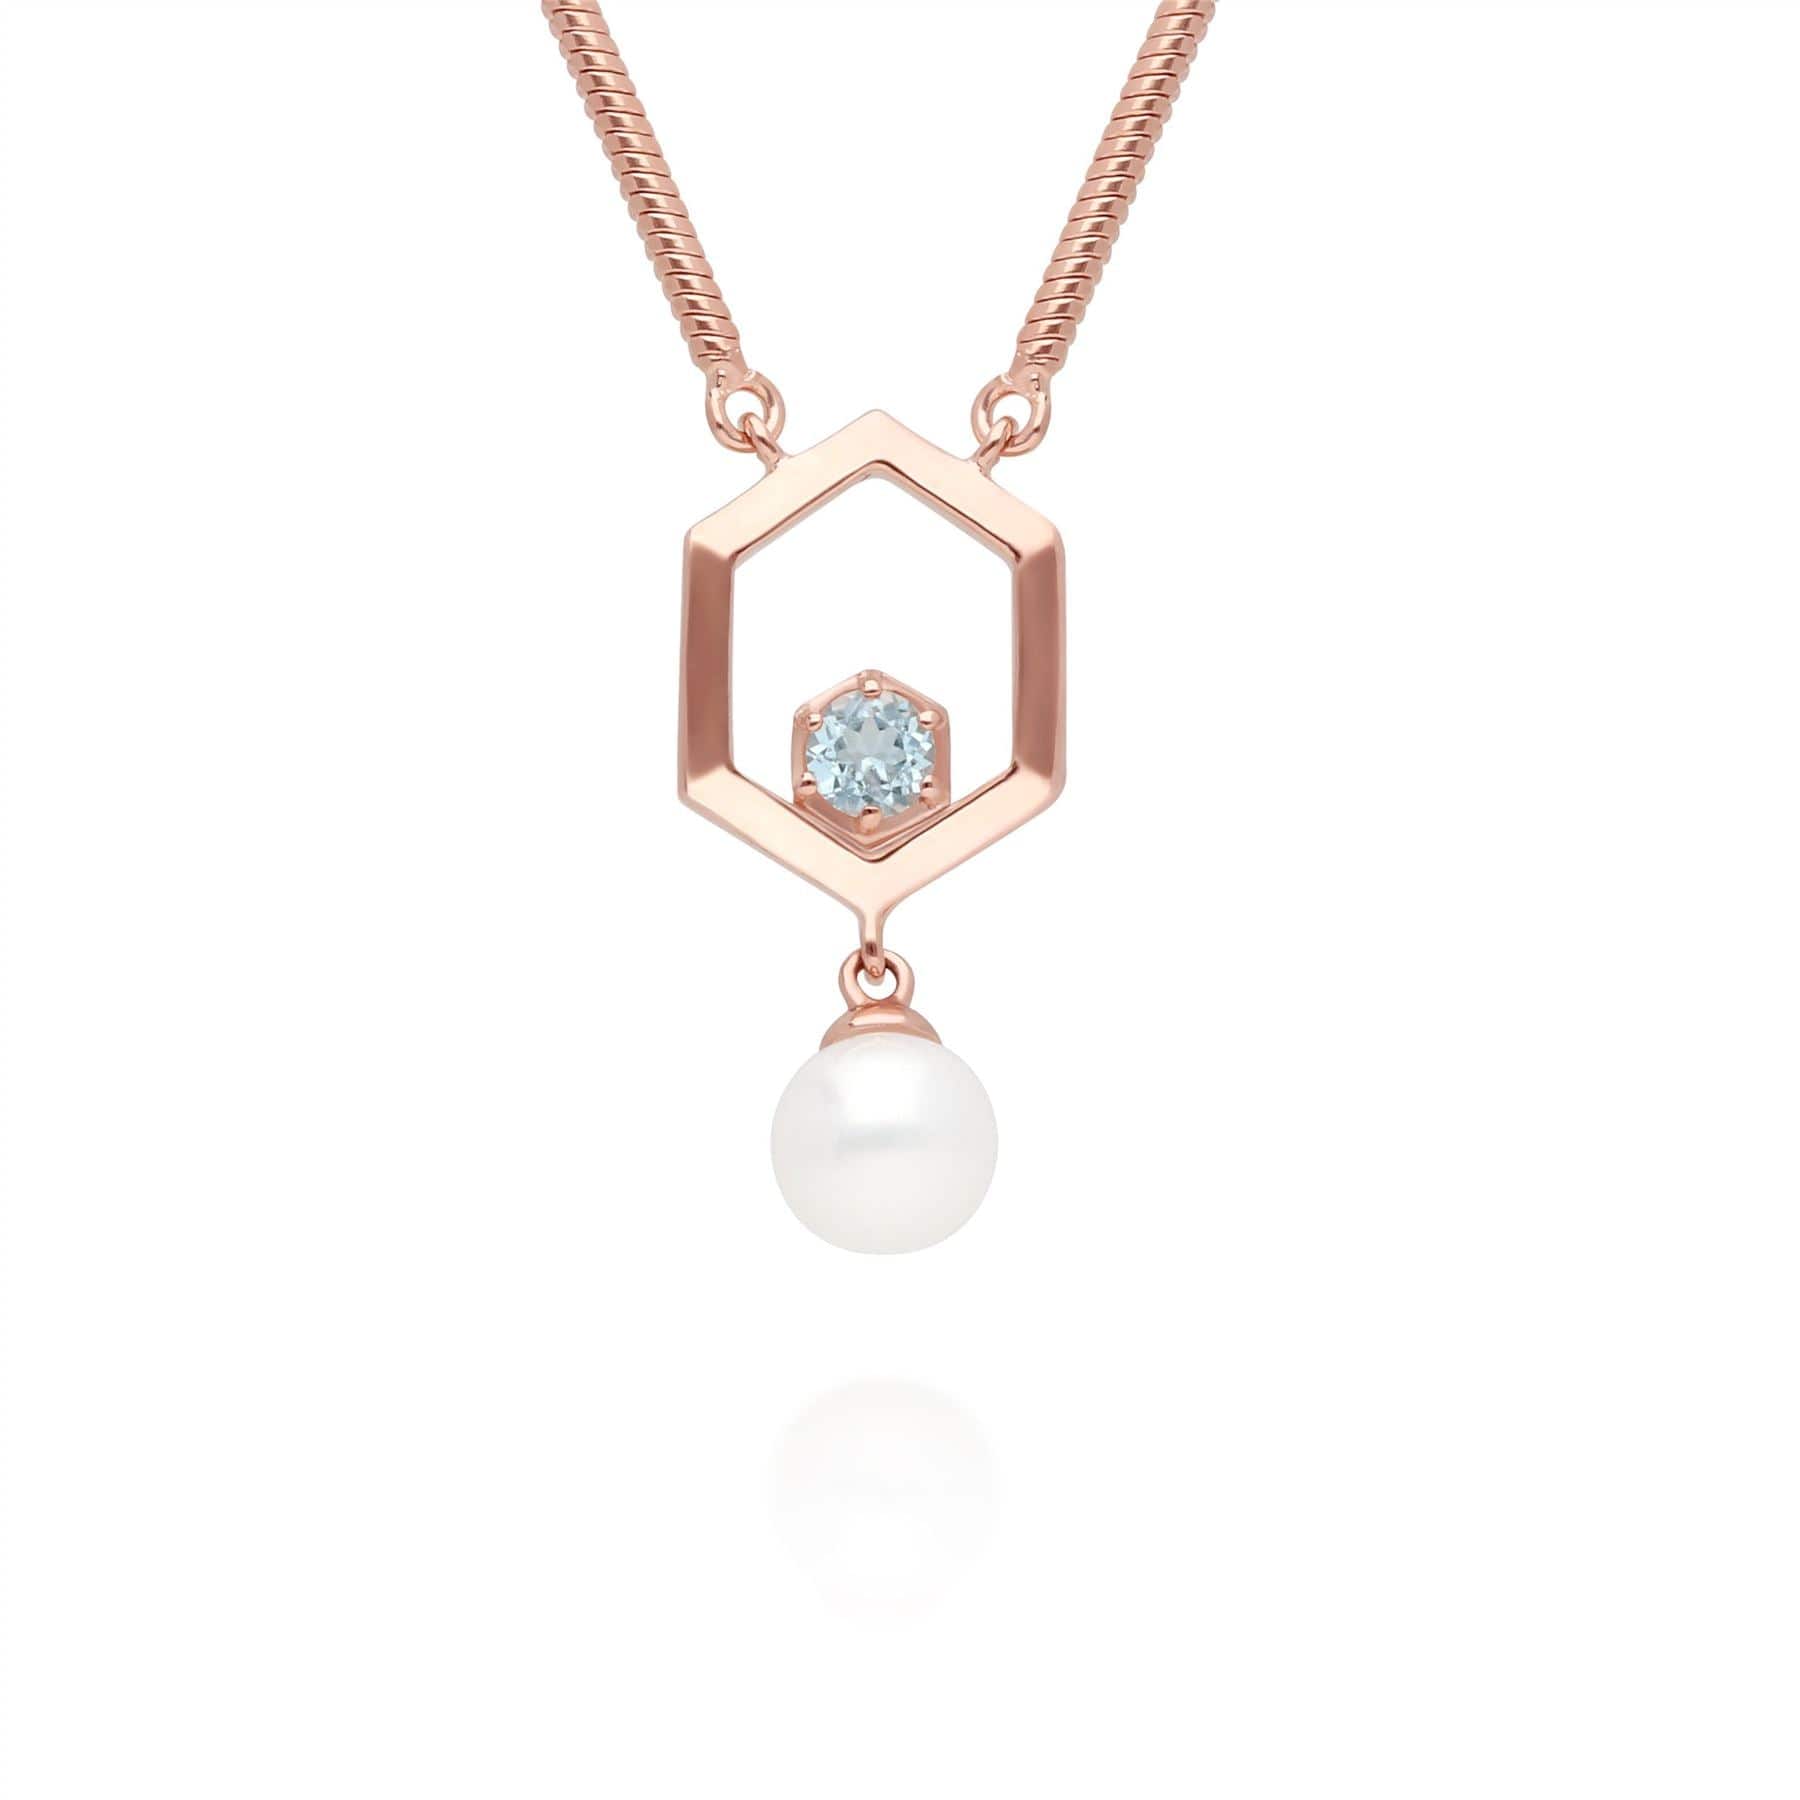 Photos - Pendant / Choker Necklace Modern Pearl & Aquamarine Hexagon Drop Necklace in Rose Gold Plated Silver